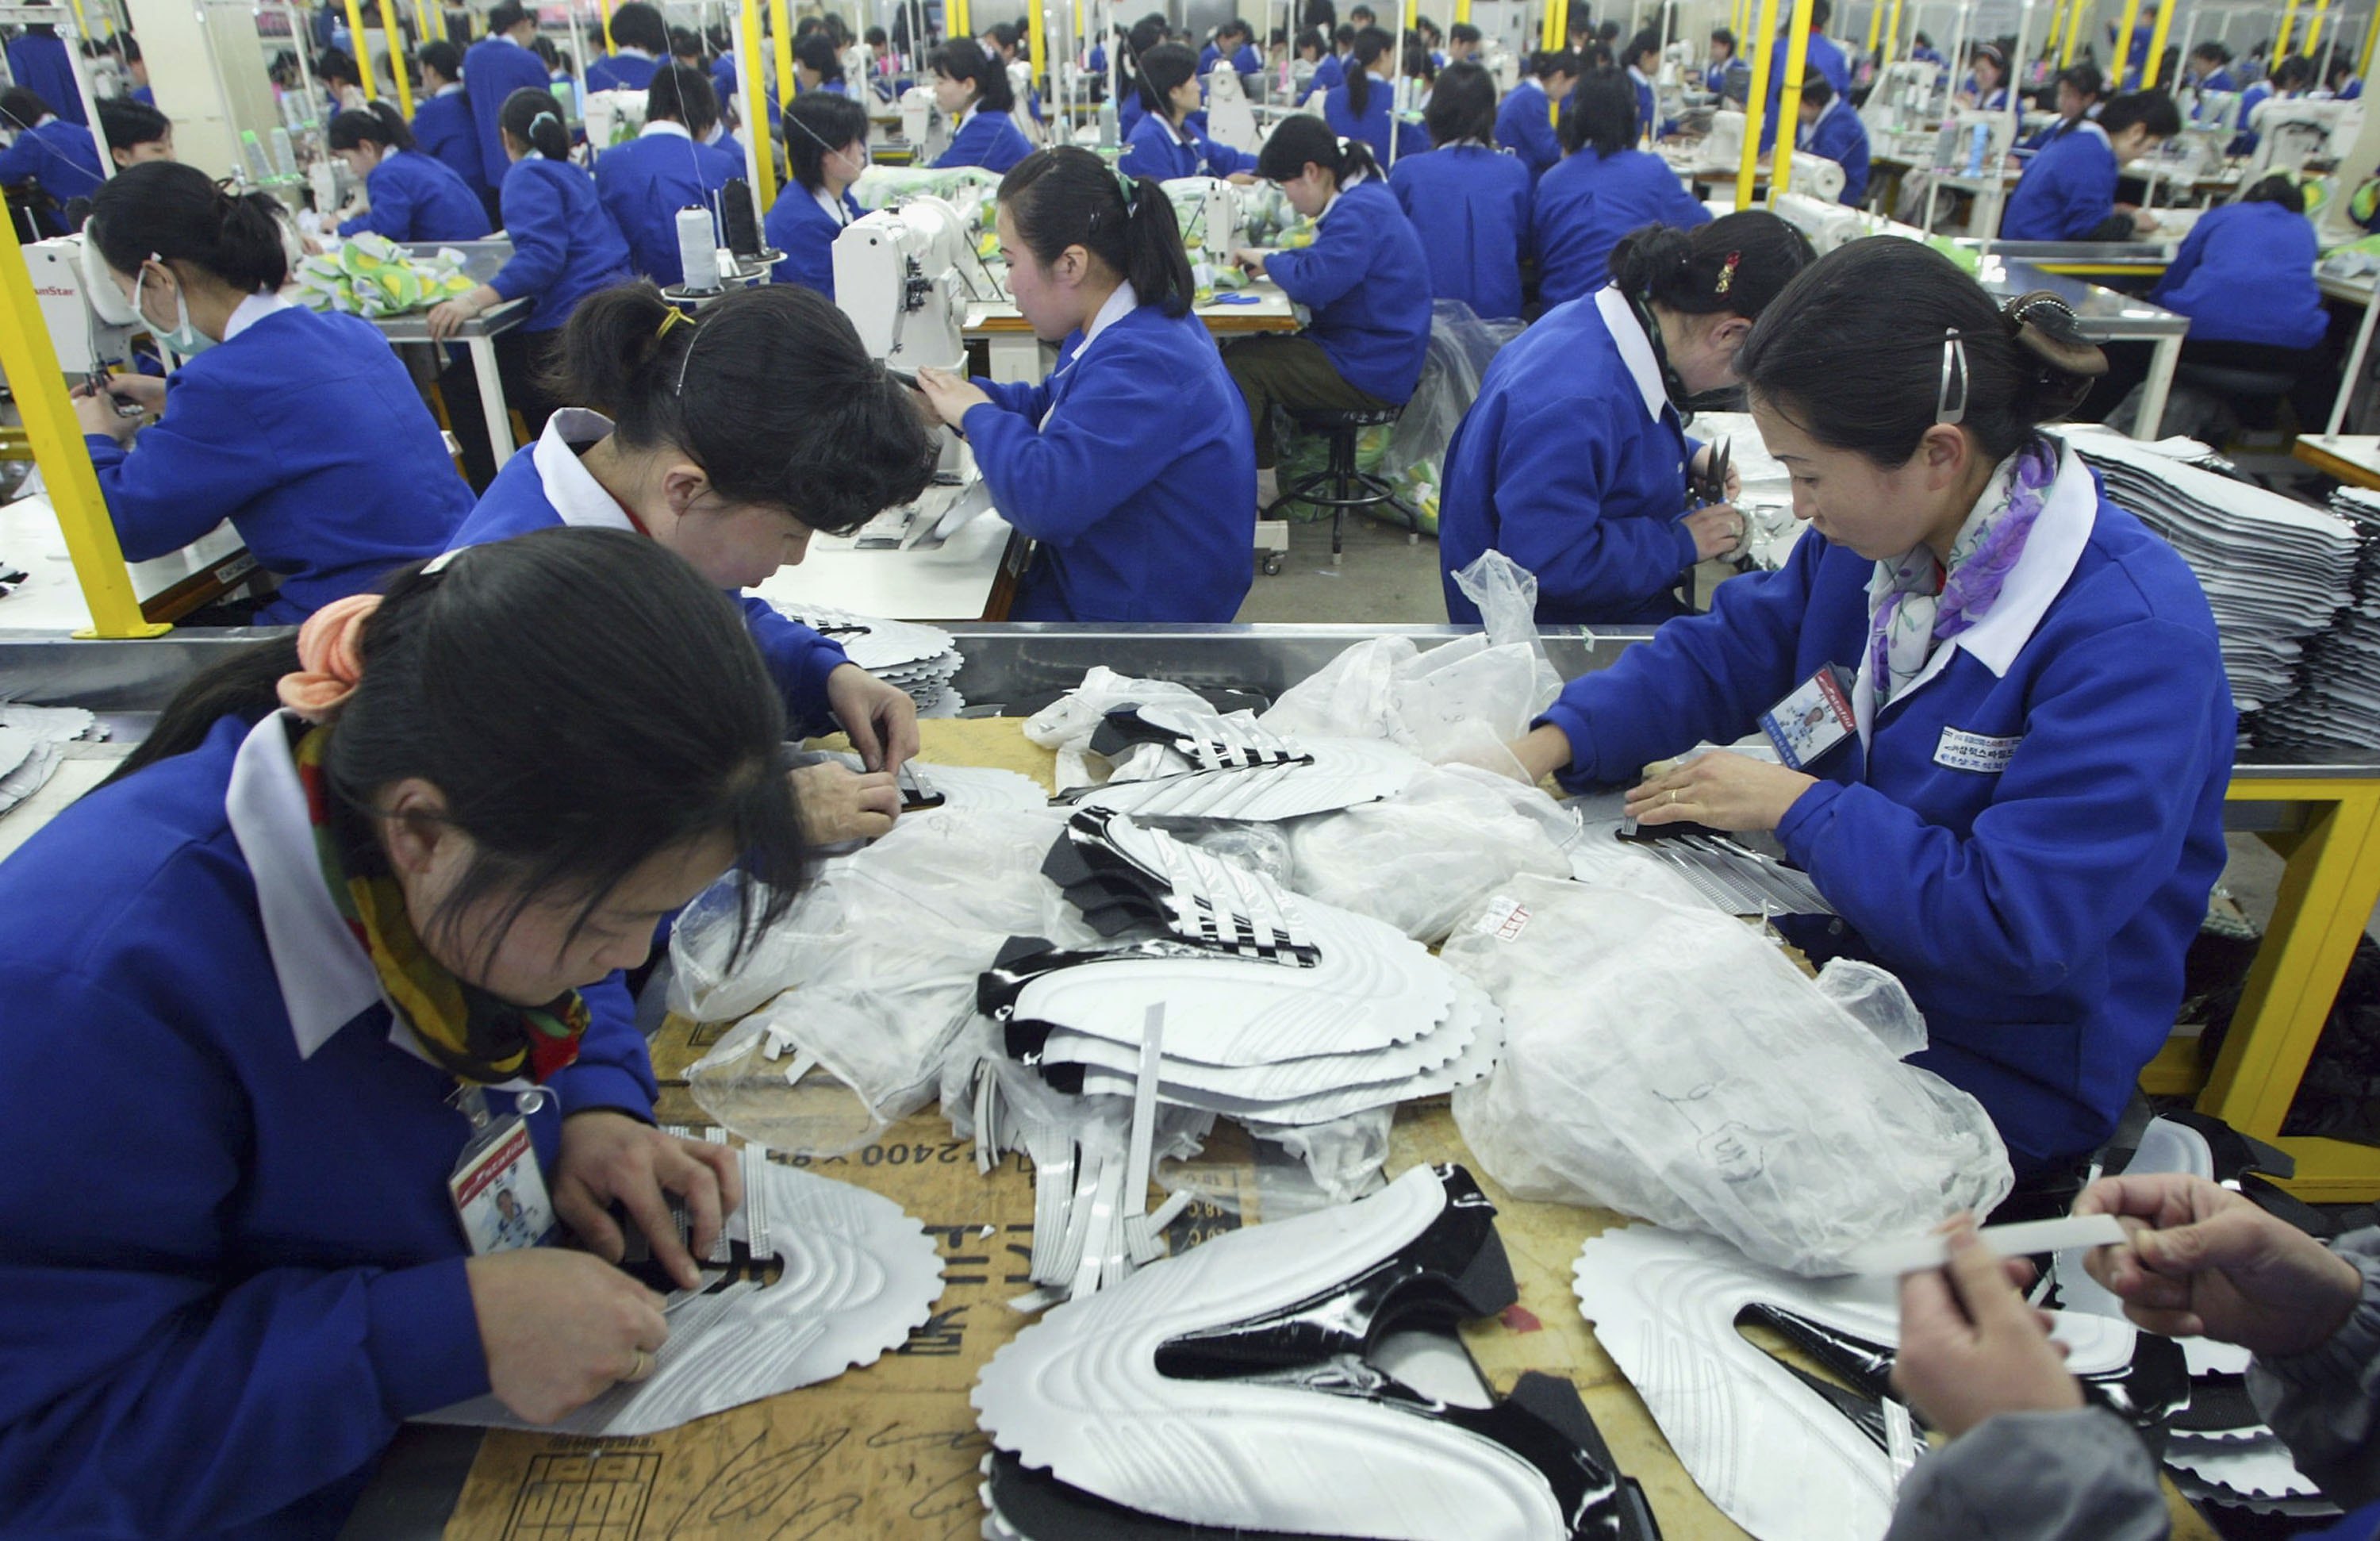 North Korean women work at the assembly line of the factory of shoemaker Samduk Inc. at the Kaesong industrial complex in Kaesong, North Korea on Feb. 27, 2006. (photo by Chung Sung-Jun/Getty Images)